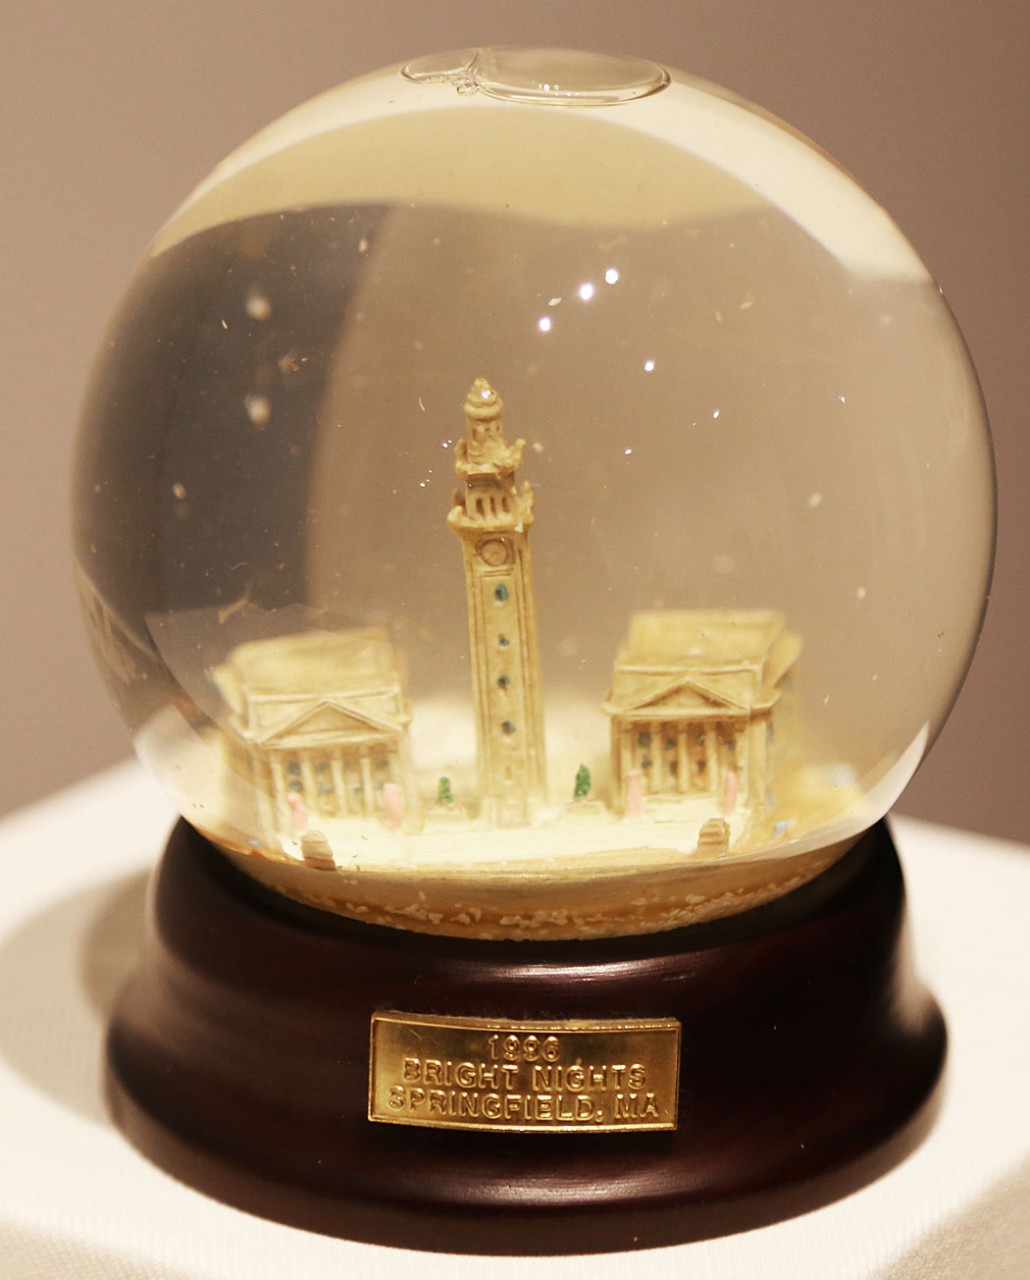 A snow globe created for and given to sponsors who have attended Springfield’s Bright Nights Ball, an annual event begun in 1996 to raise funds to light up the city during the winter months. The three buildings in the globe were the first ones illuminated as part of the project, Courtney reports. (Courtesy)